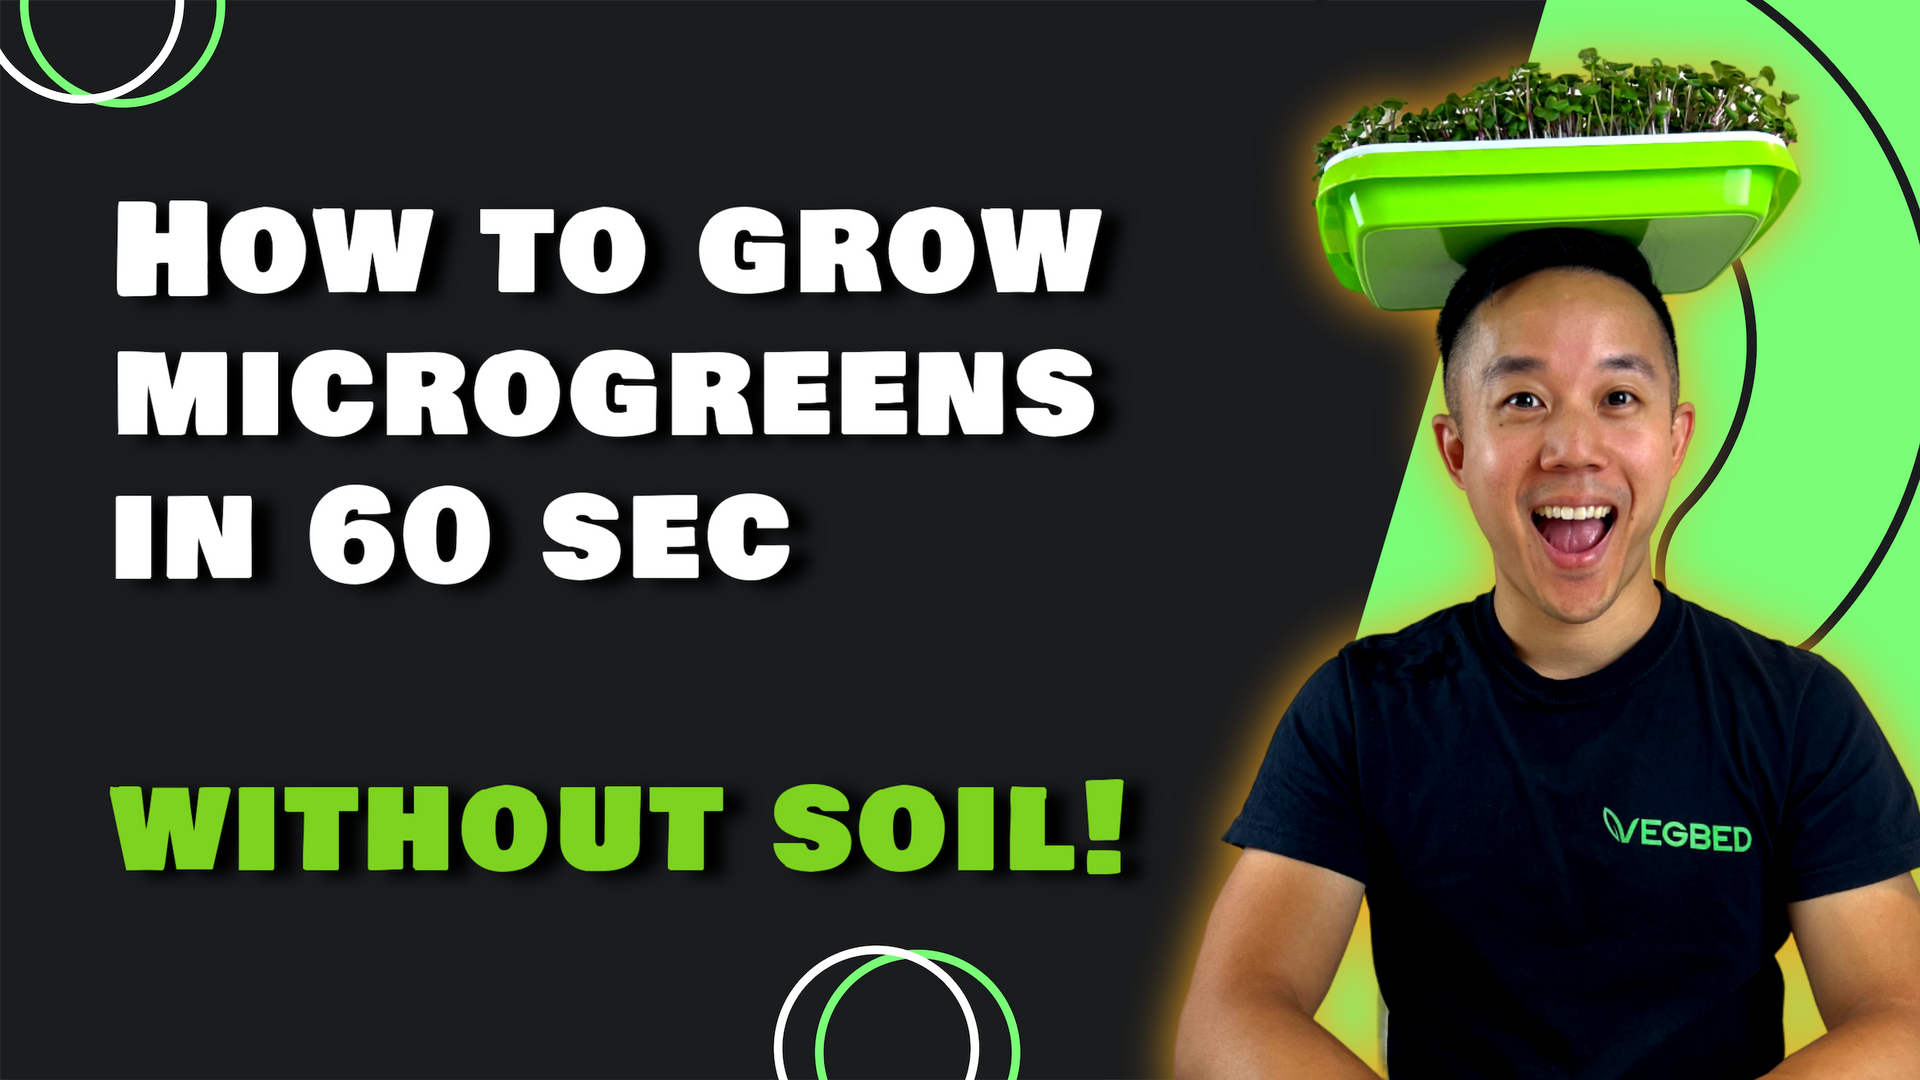 Load video: How to grow microgreens in 60 secs without soil